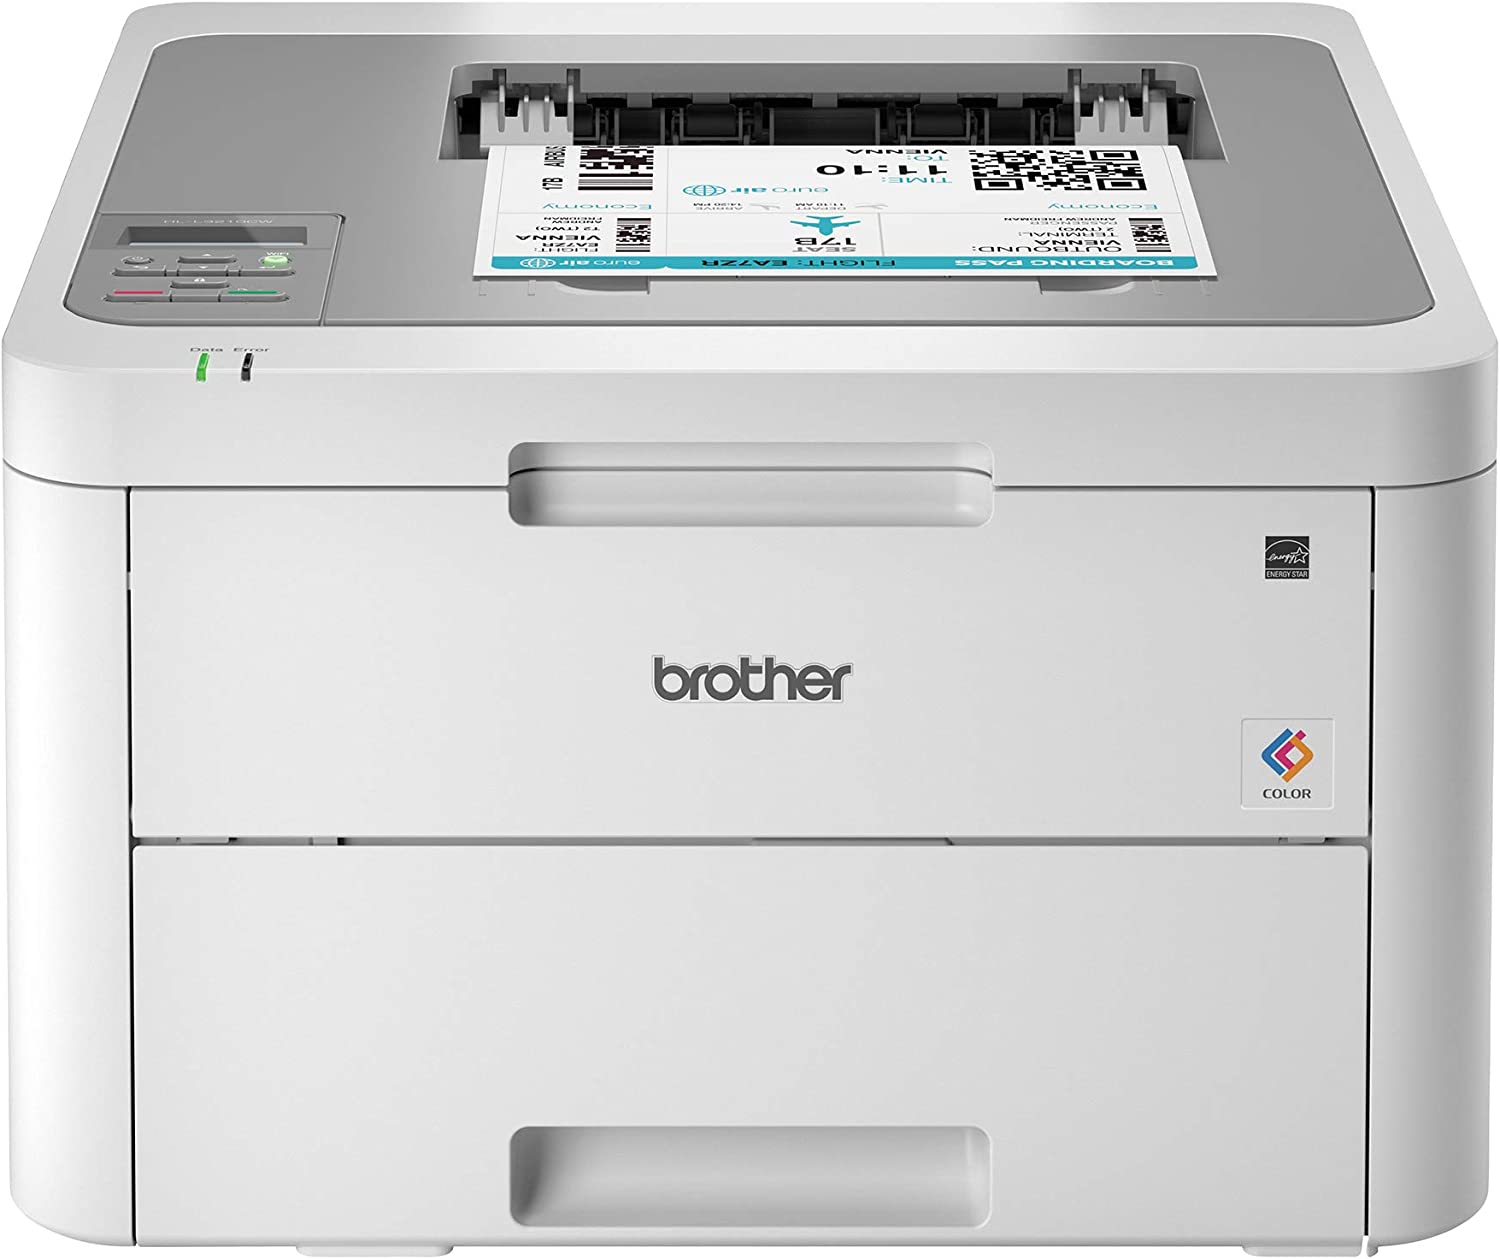 wireless color laser printer review